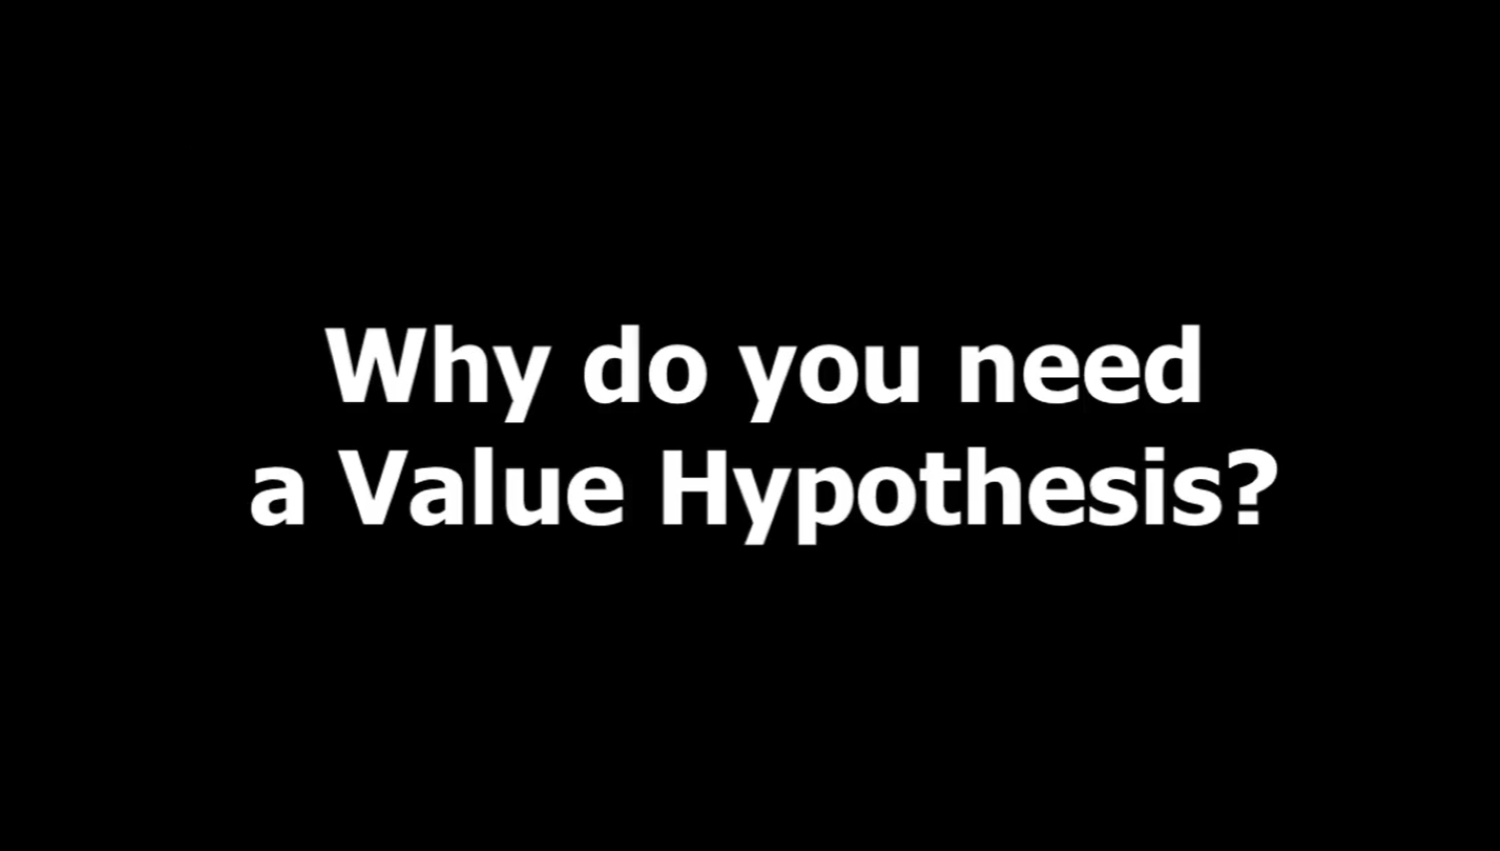 Why do you need a Value Hypothesis?